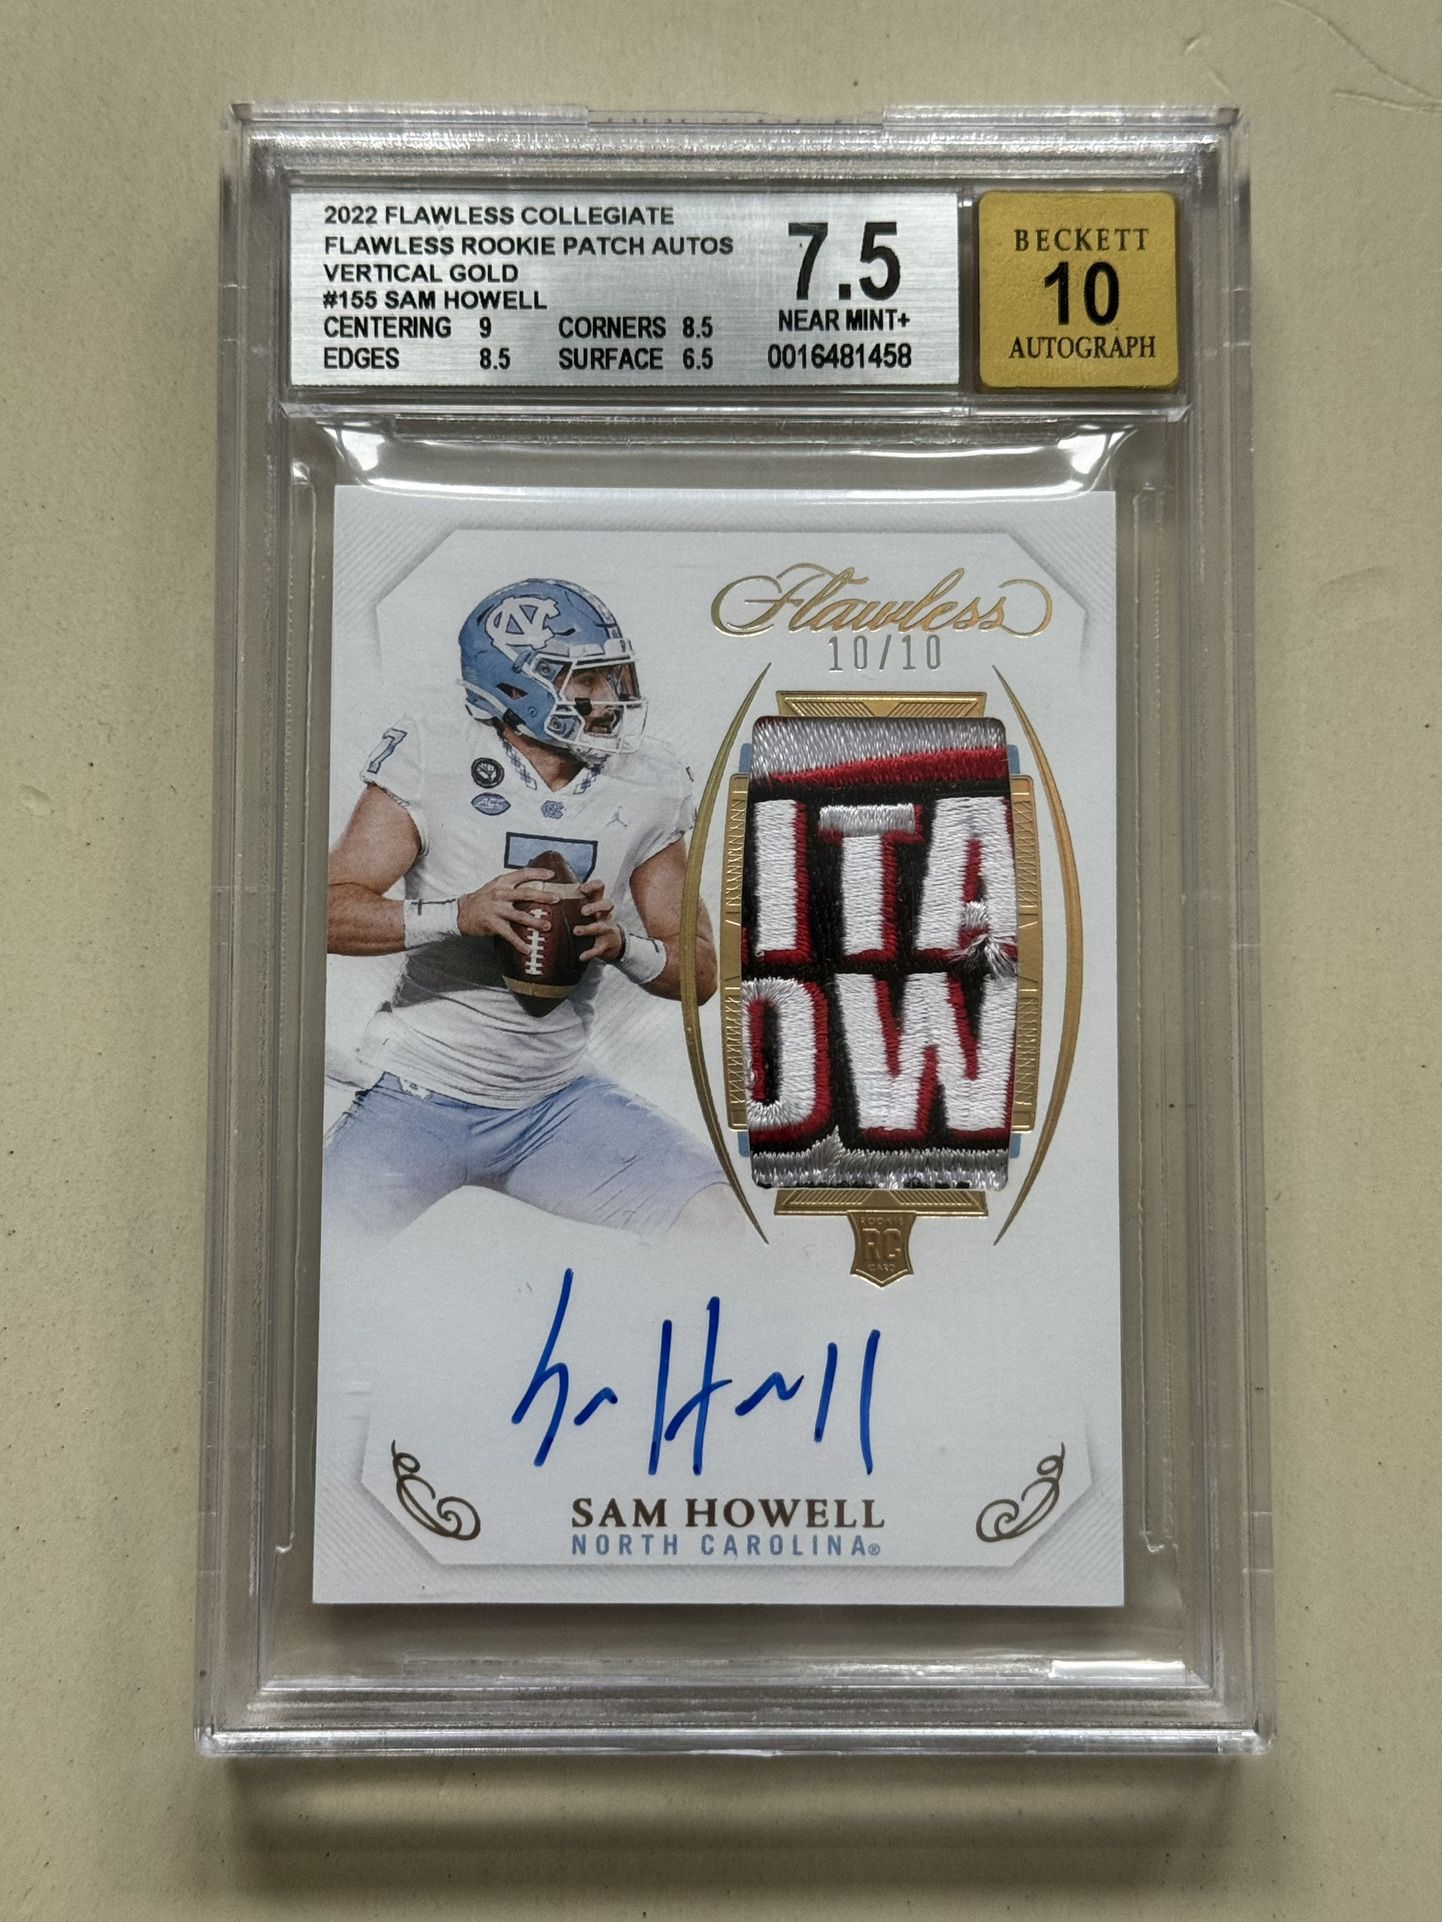 2022 Flawless Collegiate Sam Howell Rookie Patch Auto Vertical Gold BGS 7.5  Commanders, Seahawks, North Carolina 